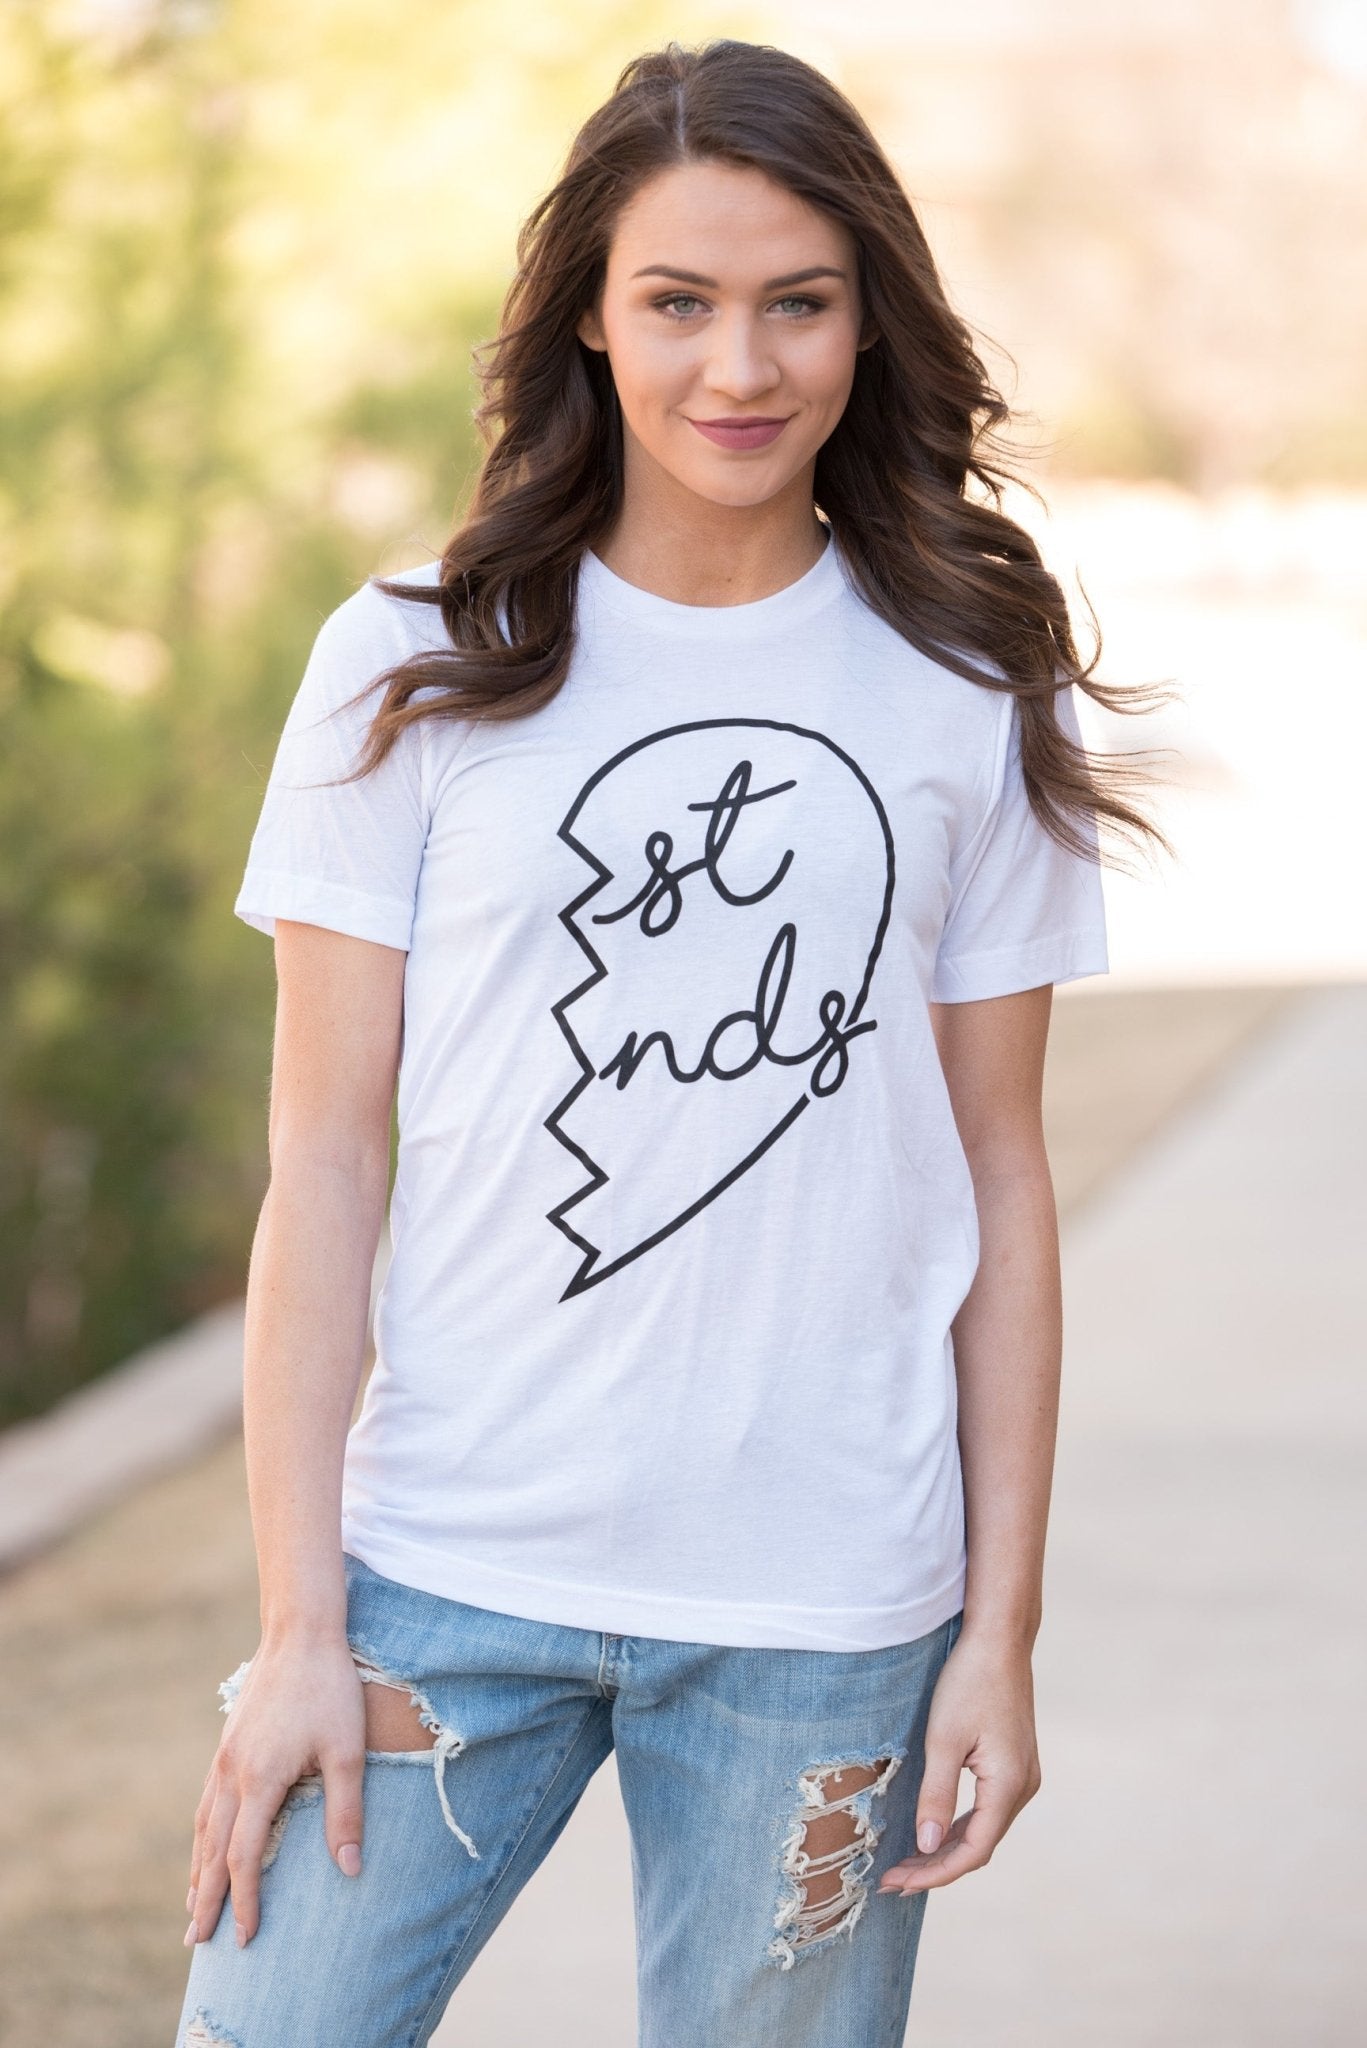 RIGHT side best friends t-shirt white - Stylish T-shirts - Trendy Graphic T-Shirts and Tank Tops at Lush Fashion Lounge Boutique in Oklahoma City